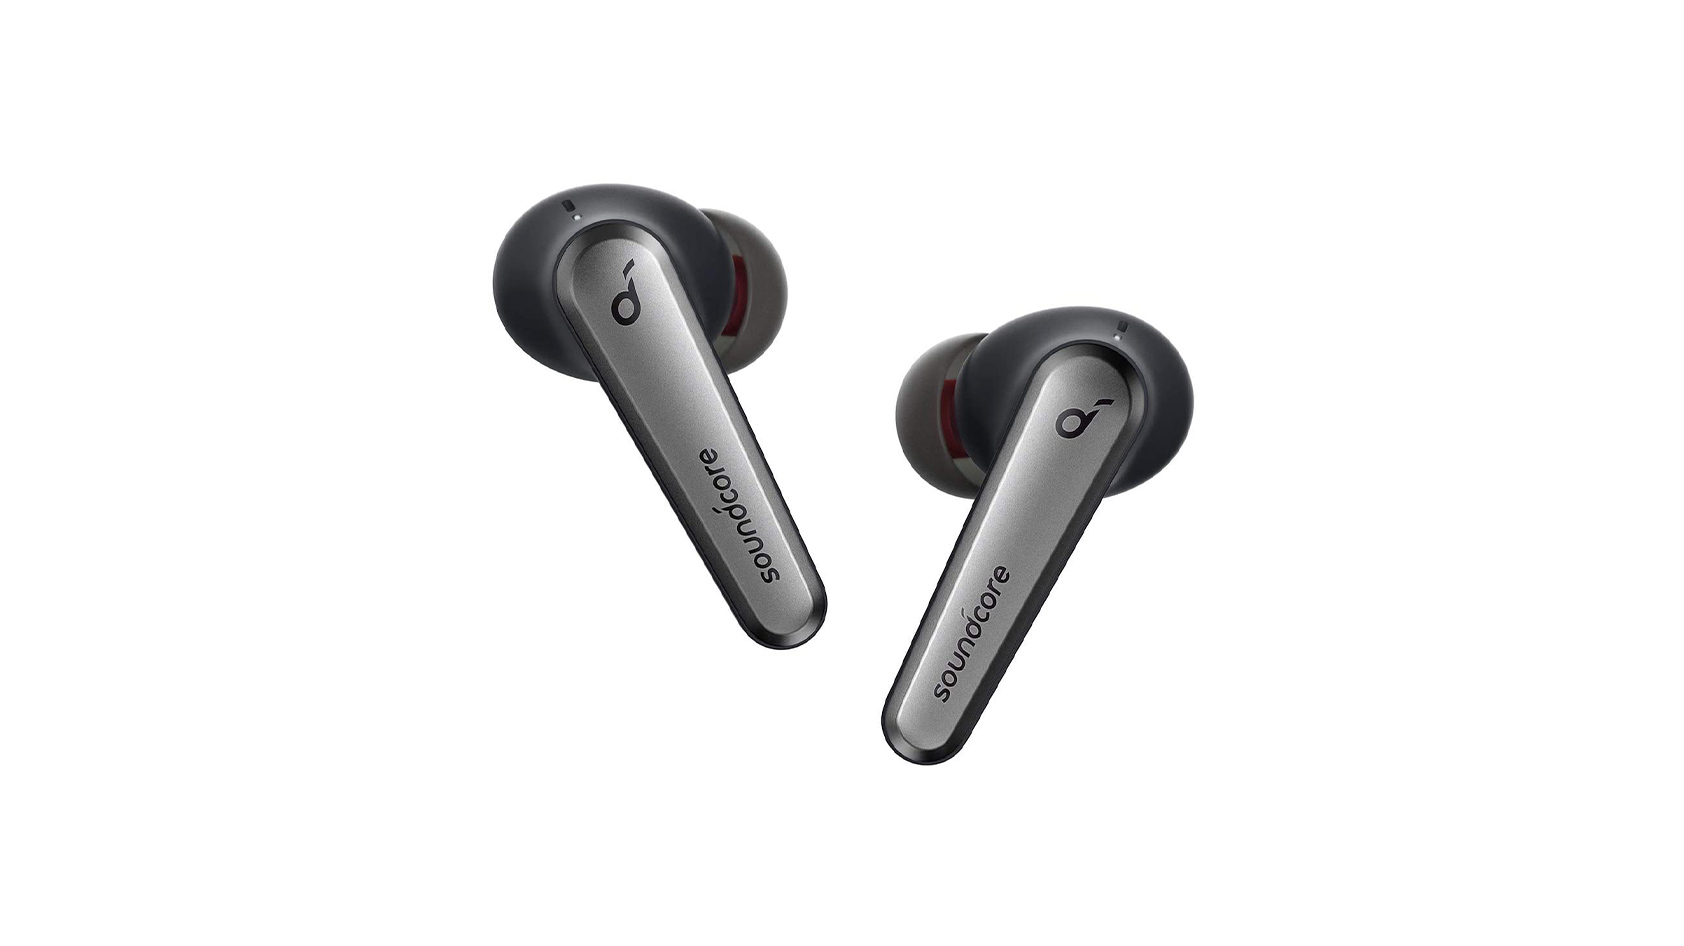 Anker Soundcore Liberty Air 2 Pro noise canceling true wireless earphones against a white background.